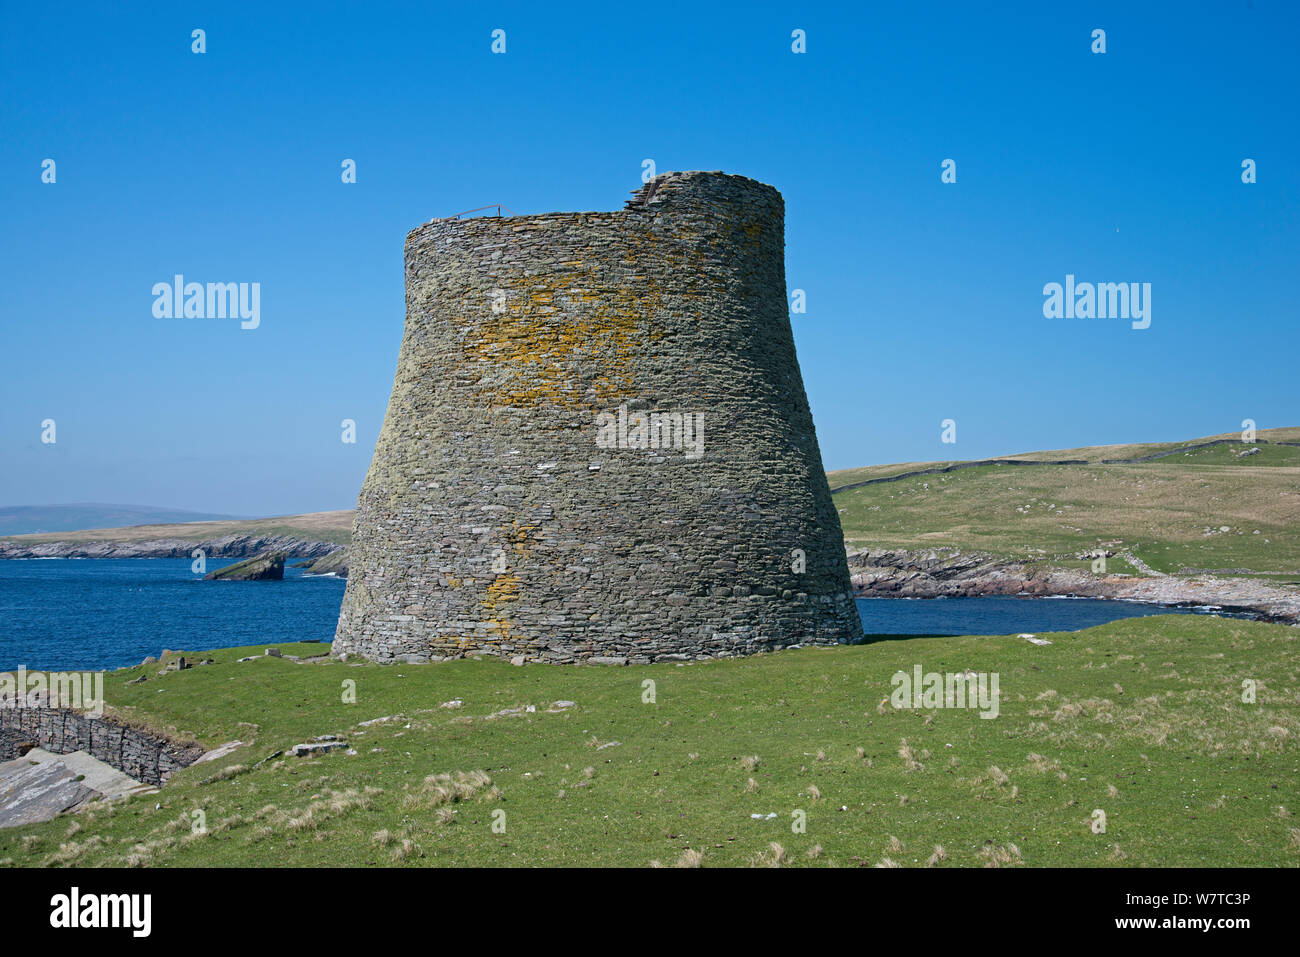 Ancient broch, a drystone structure with hollow walls, Mousa, Shetland, Scotland, UK, May 2013. Stock Photo